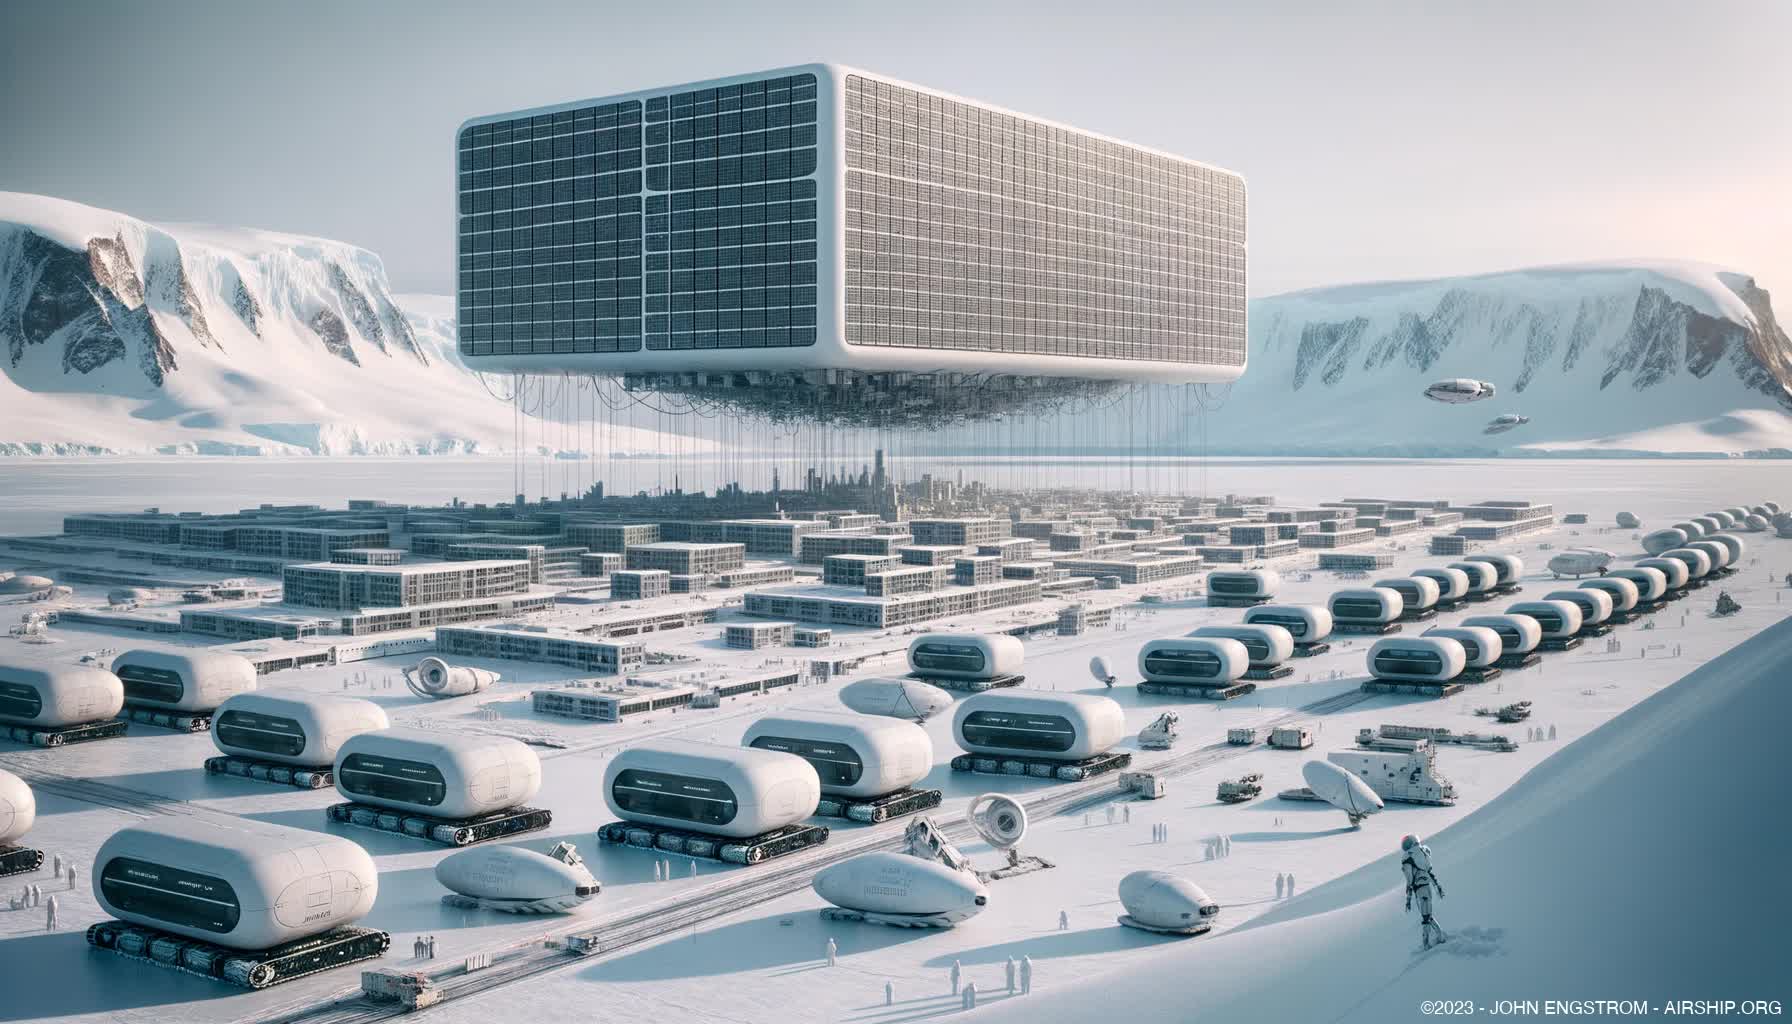 Arctic-Linear-City-Airship-Operations-6